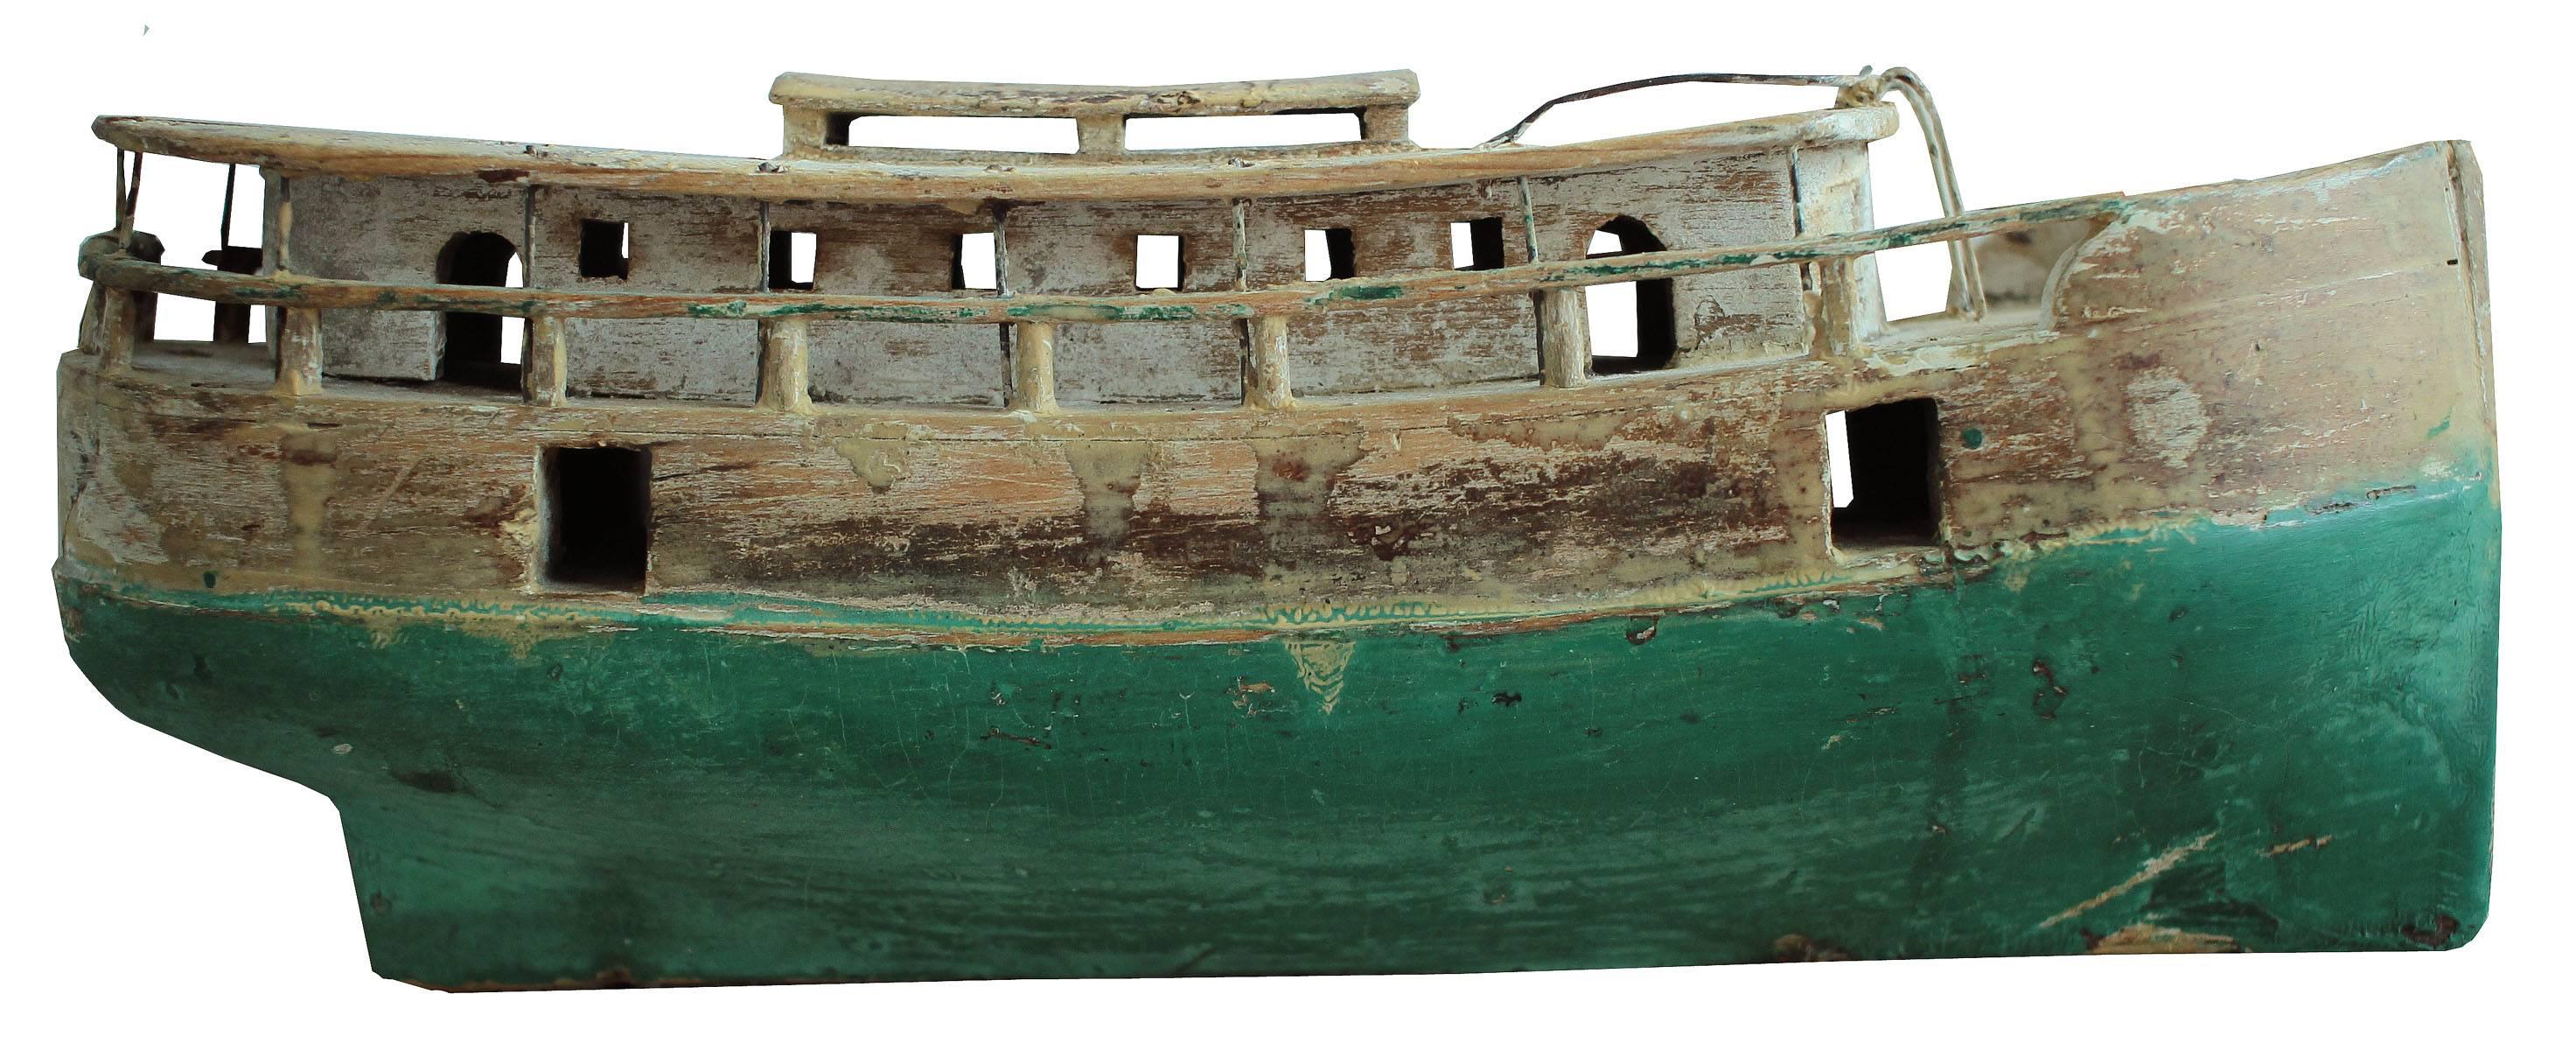 A detailed boat model, original finish, wire rails and amazing details throughout. Each deck is hand-carved with port windows and doors and wire ladders and uprights. The finish is fantastic with bleached out whites and greens.